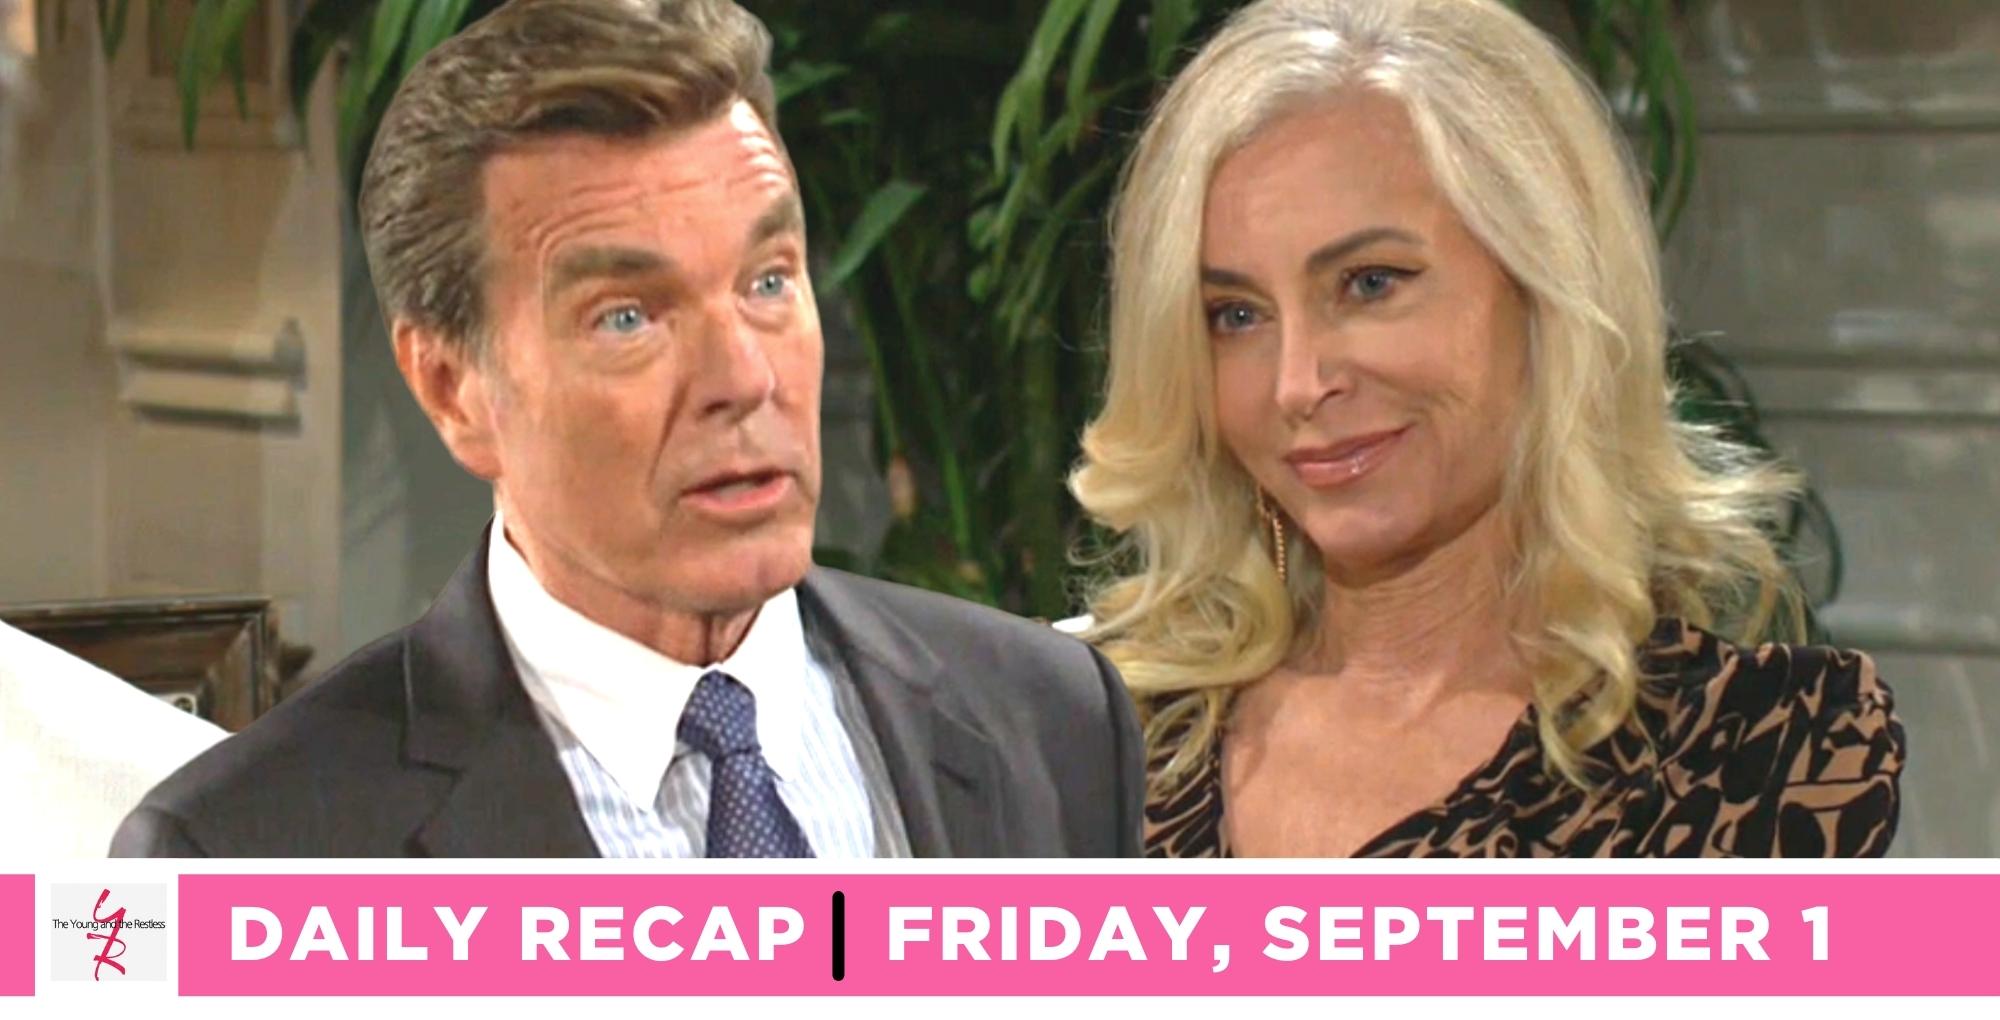 young and the restless recap for september 1, 2023, has jack and ashley talking.